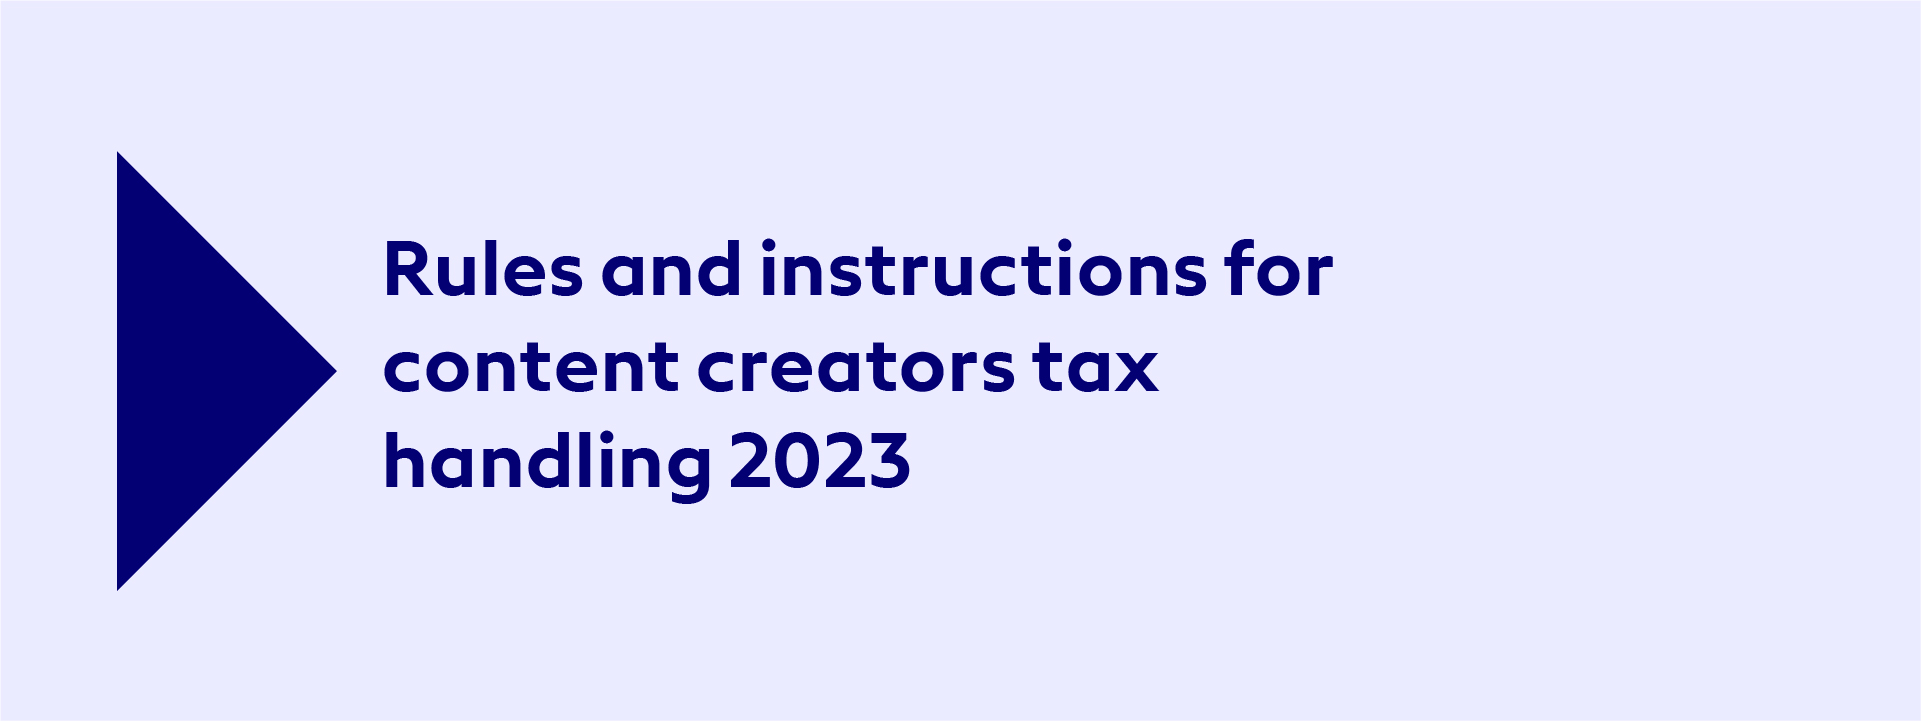 Rules and instructions for content creators tax handling 2023